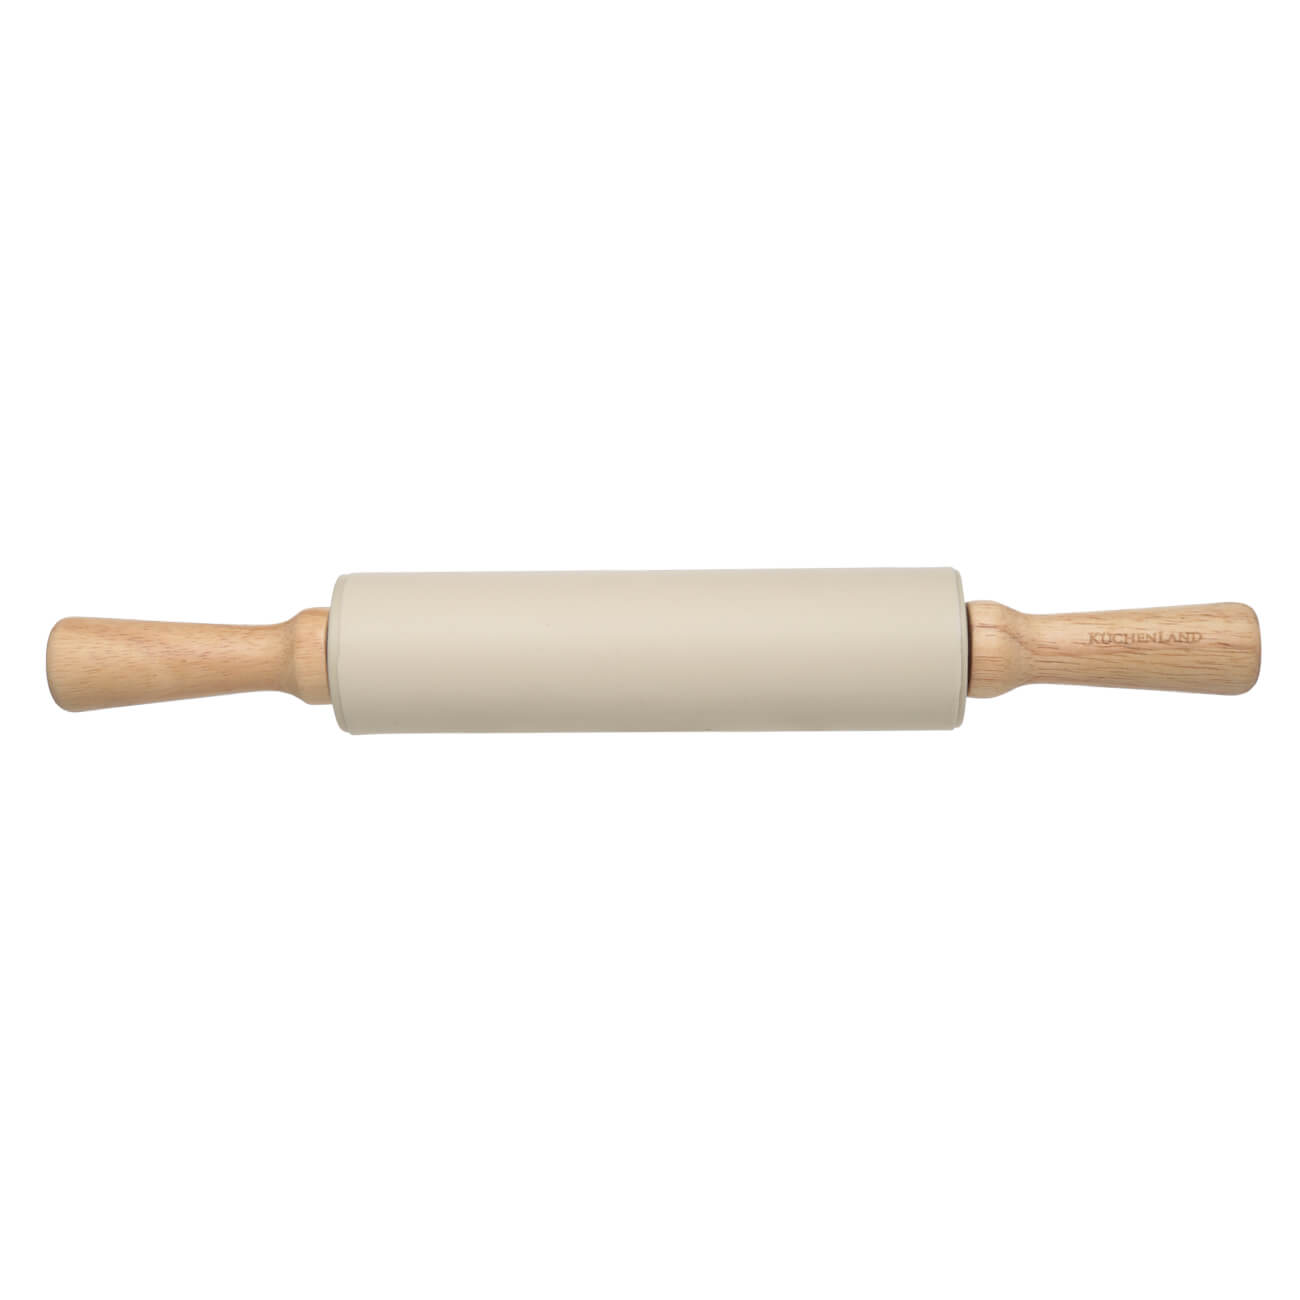 Rolling pin, 48 cm, silicone / wood, beige, Bakery изображение № 1